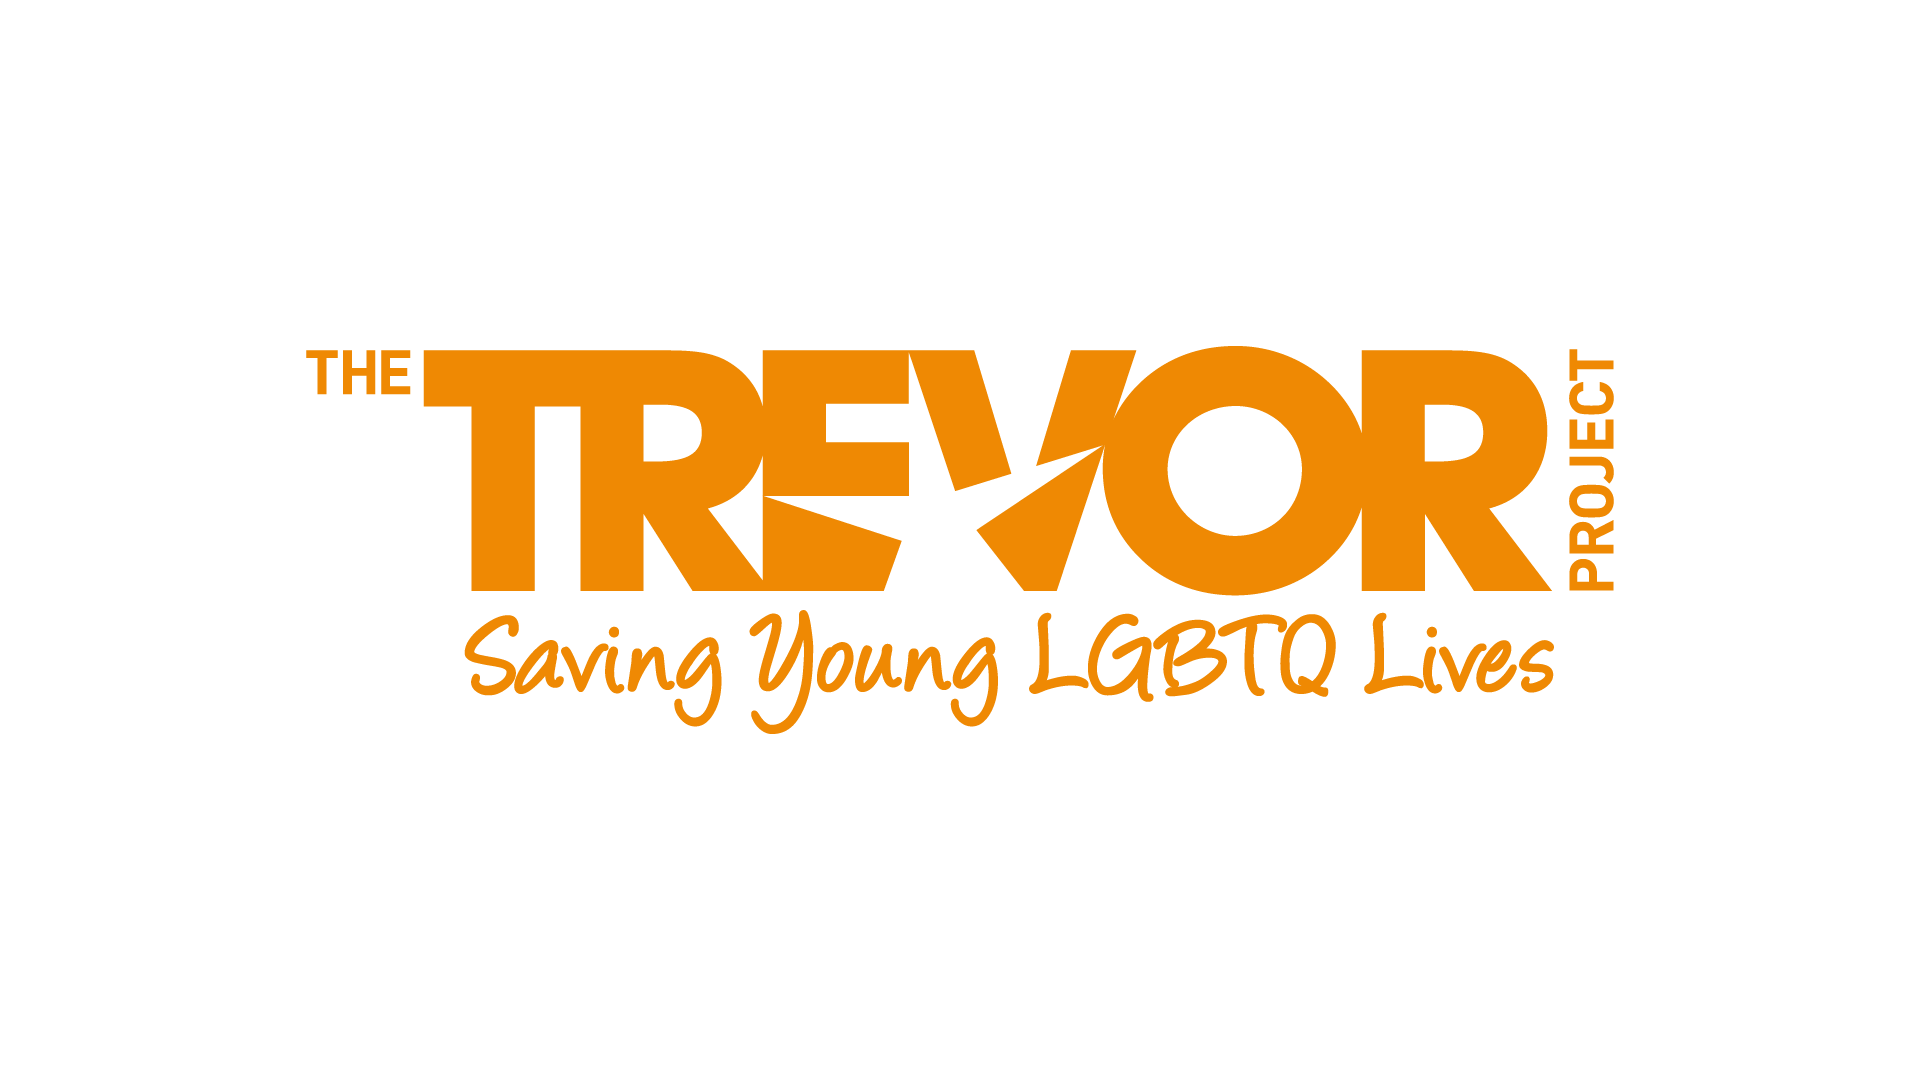 The Trevor Project - For Young LGBTQ Lives